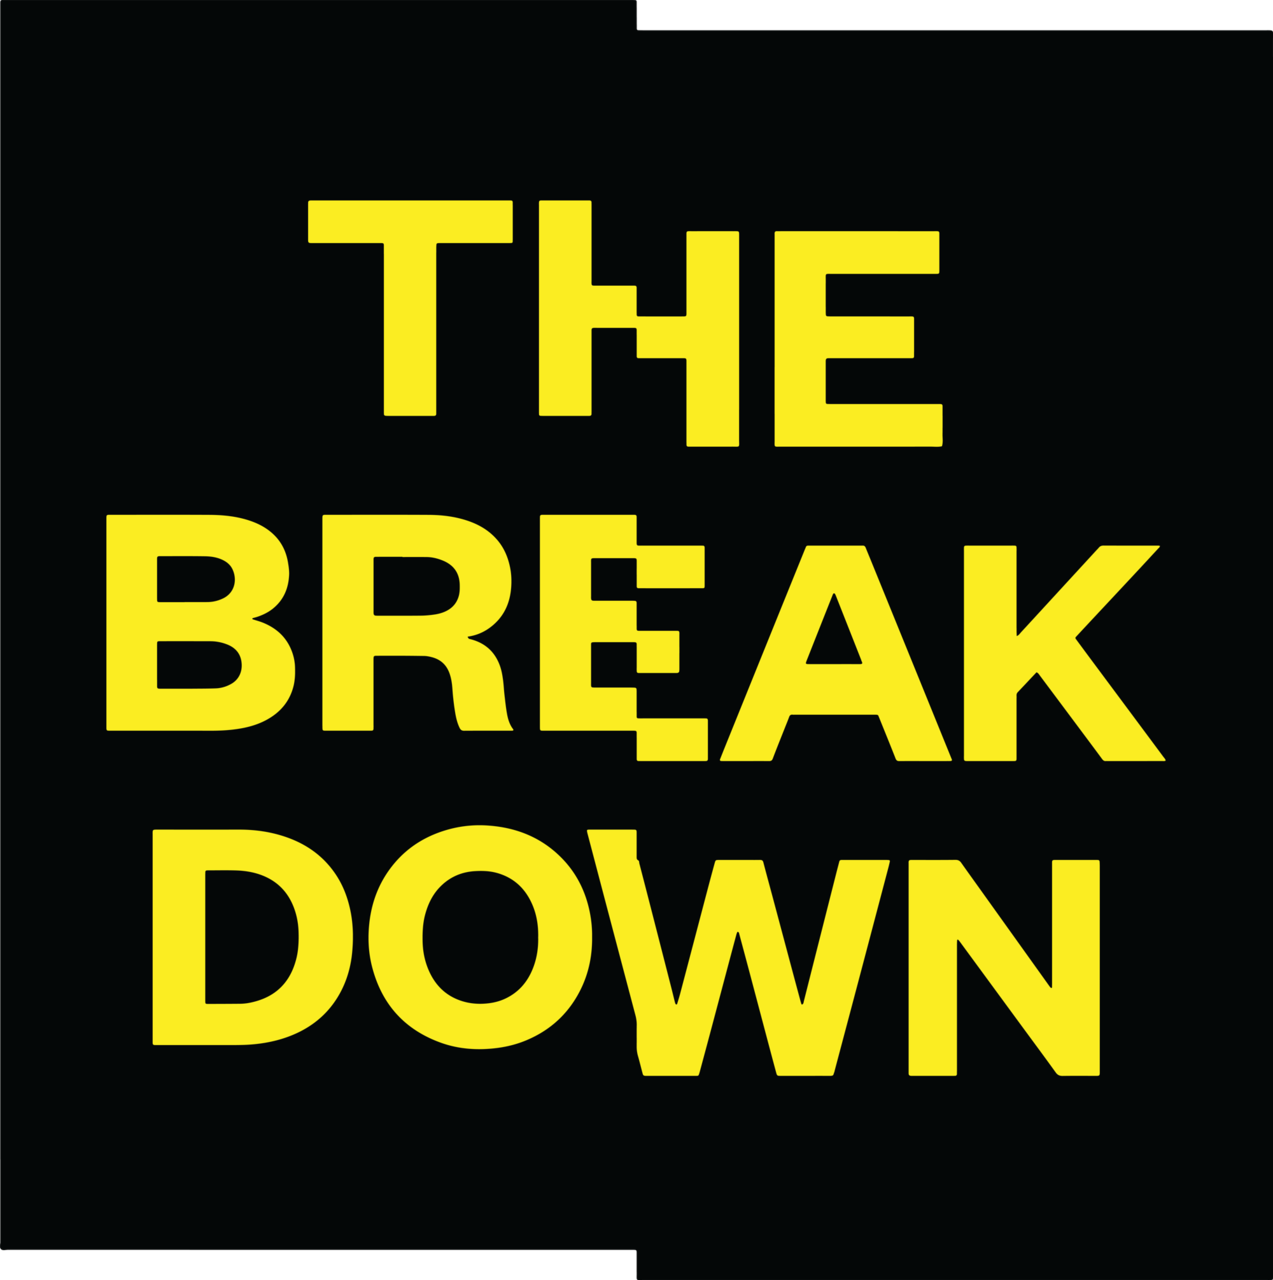 The Breakdown with Shaun King